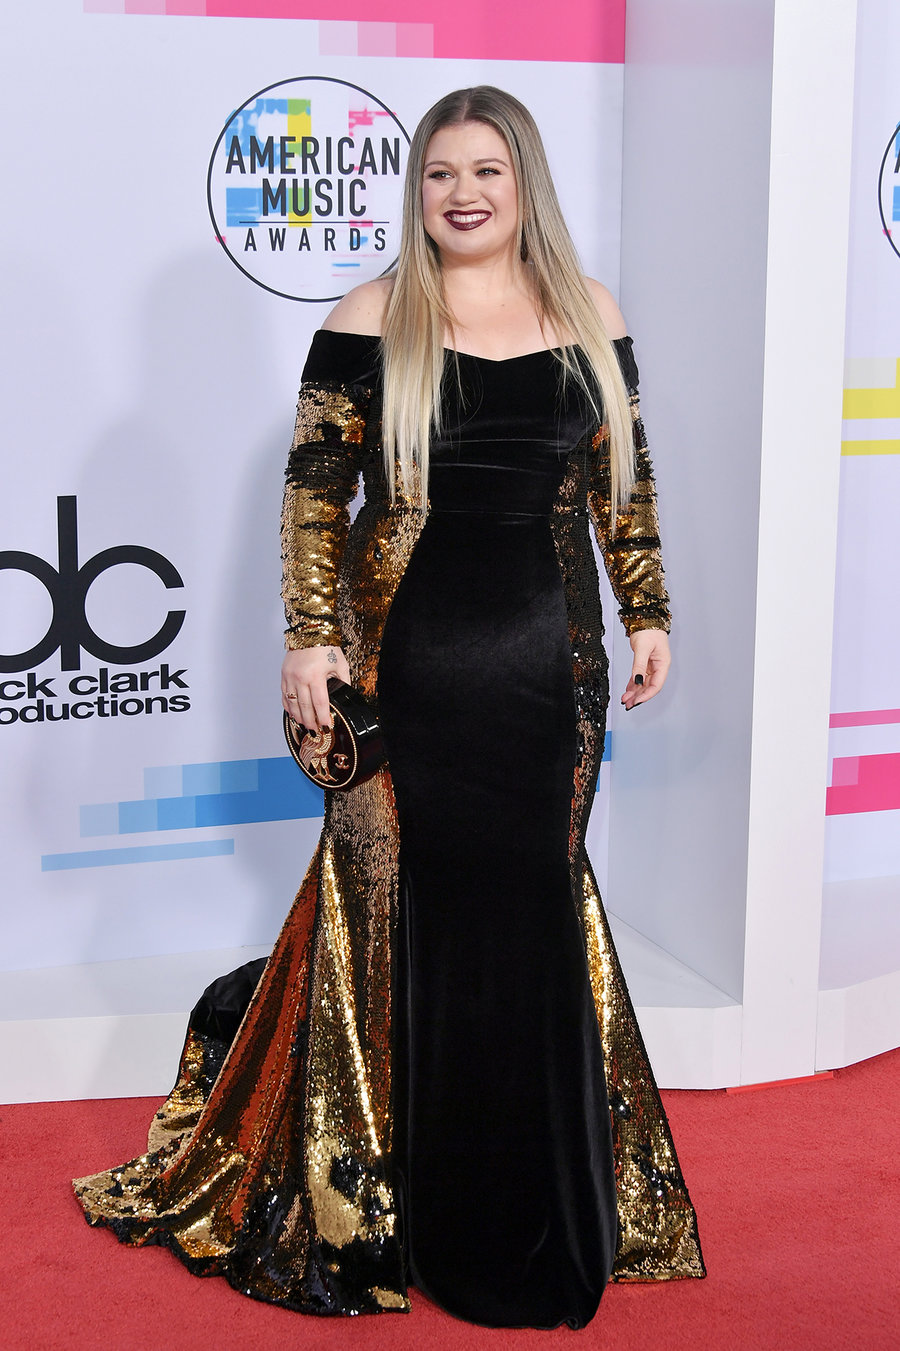 Kelly Clarkson in a Christian Siriano gown. Photo by Neilson Barnard for Getty Images